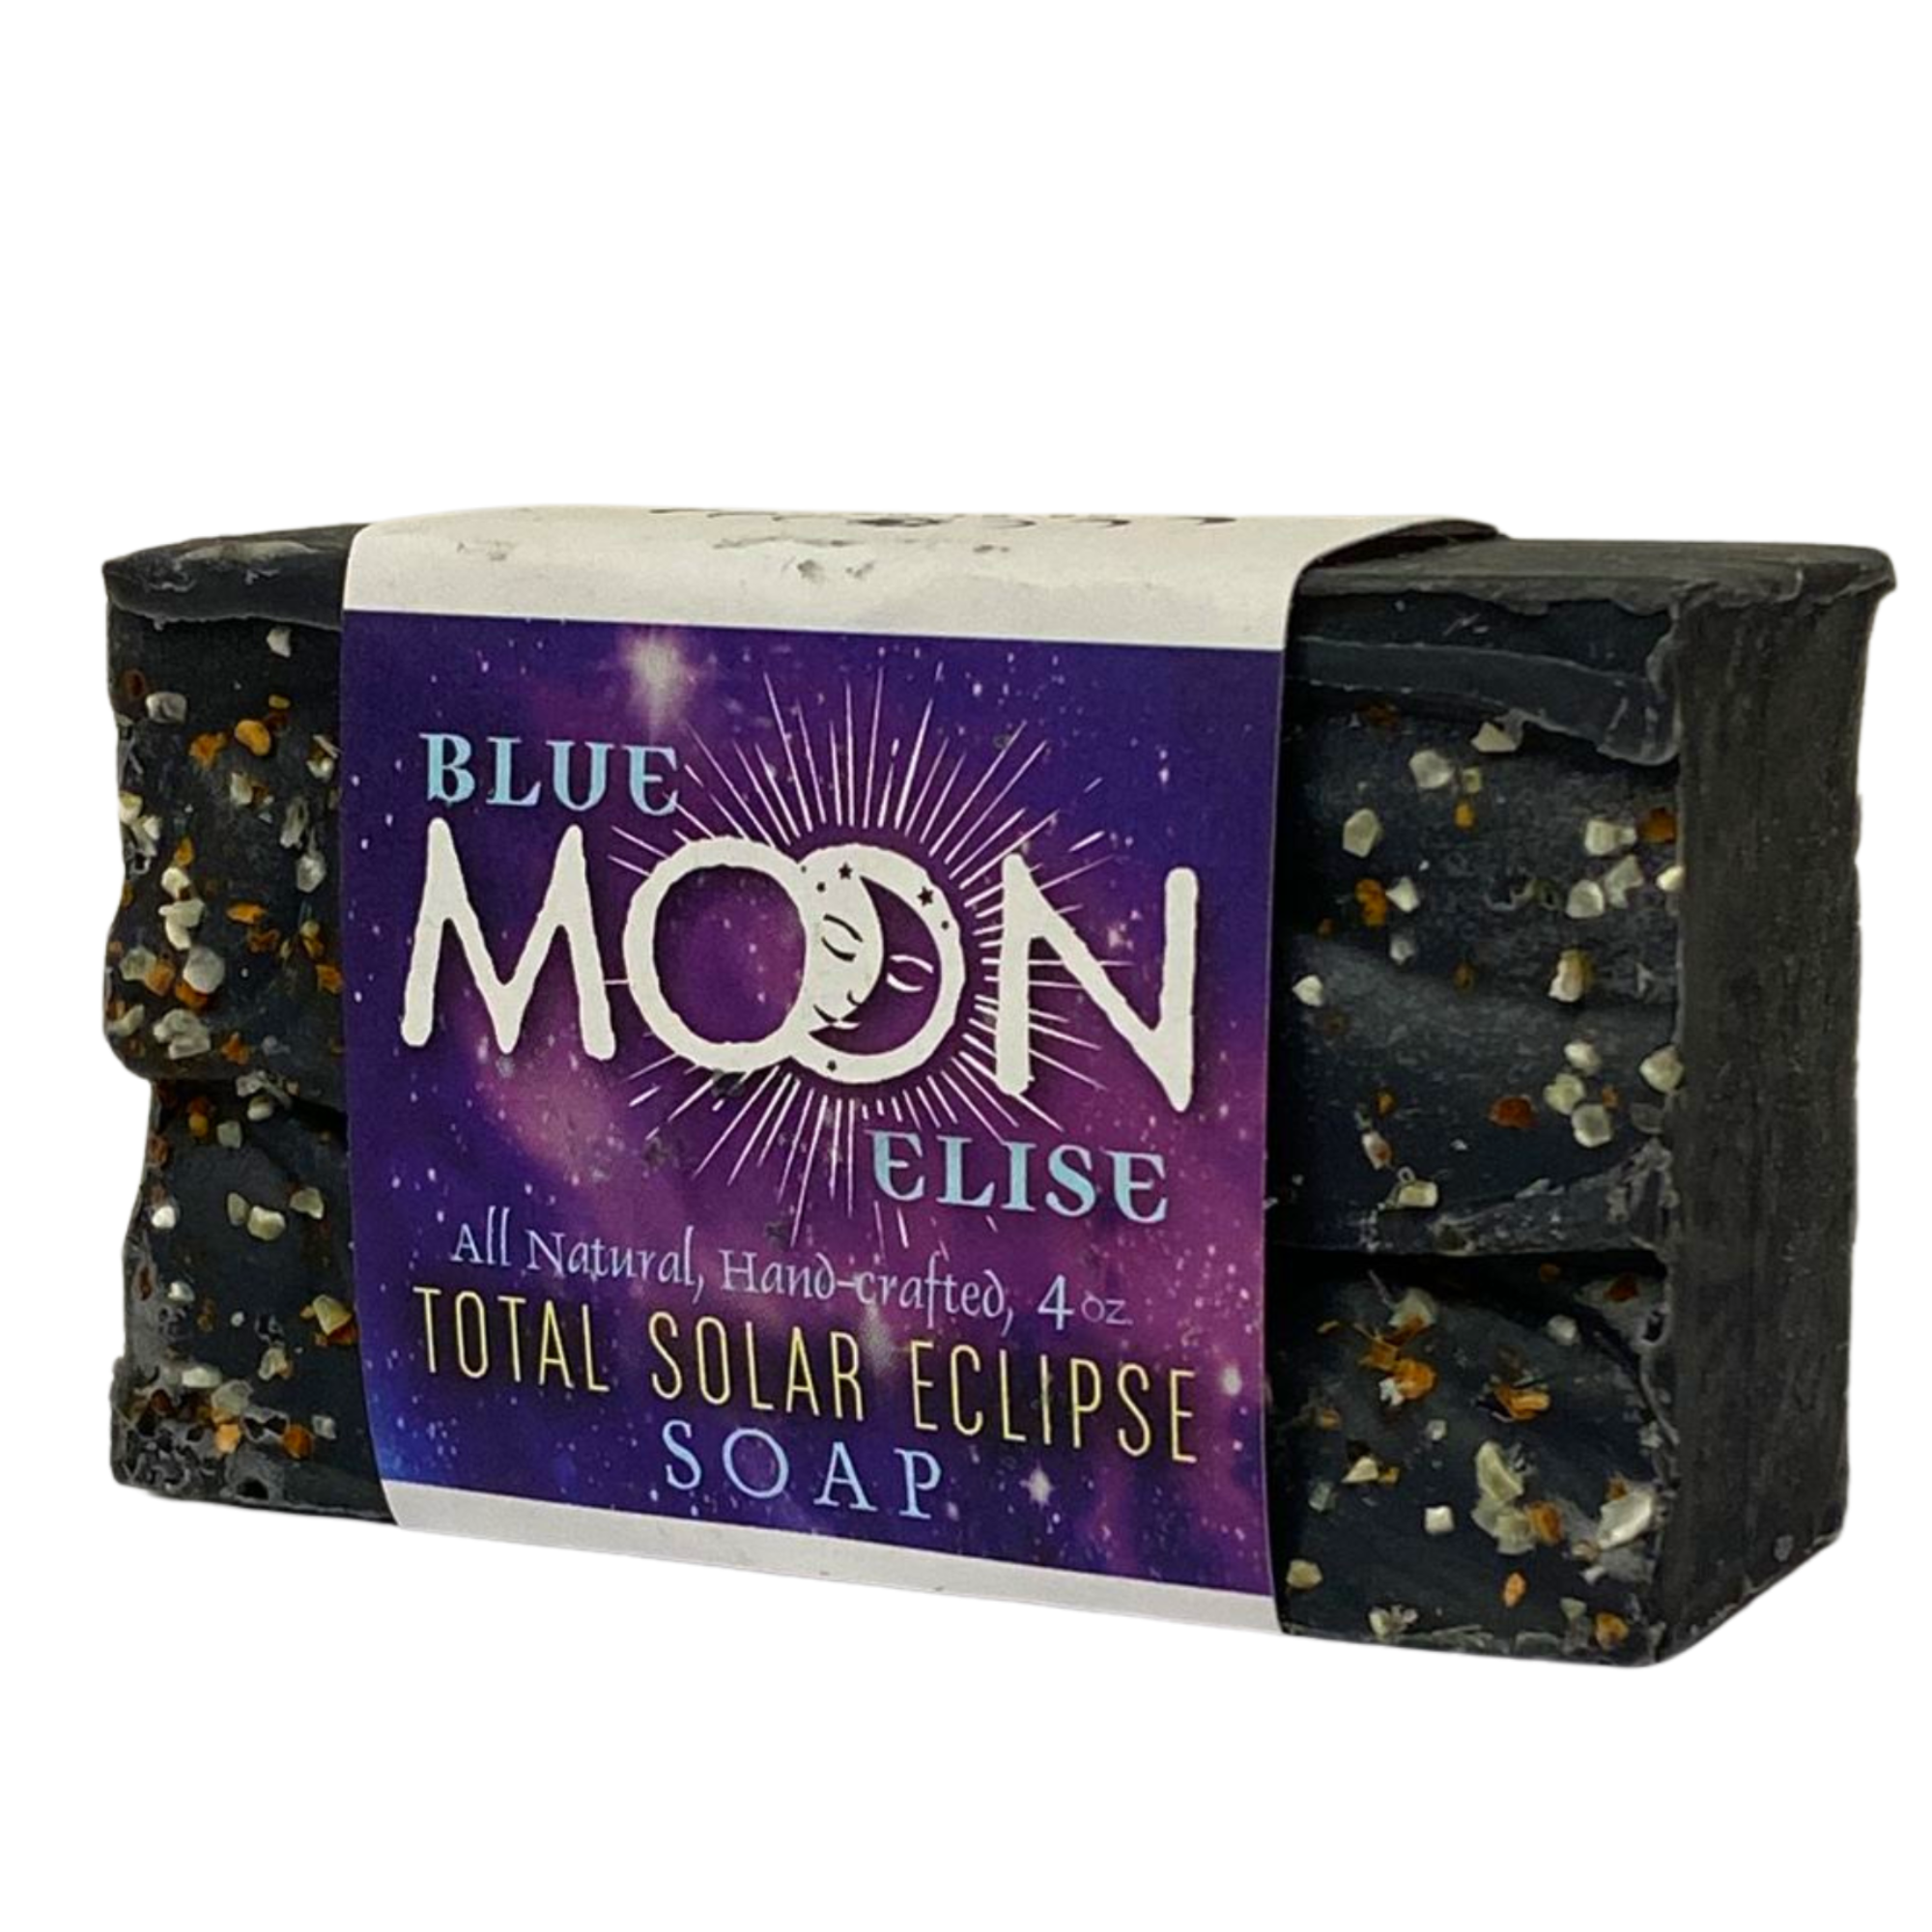 Total Solar Eclipse Soap (Buy 1, Add 2 More for FREE)